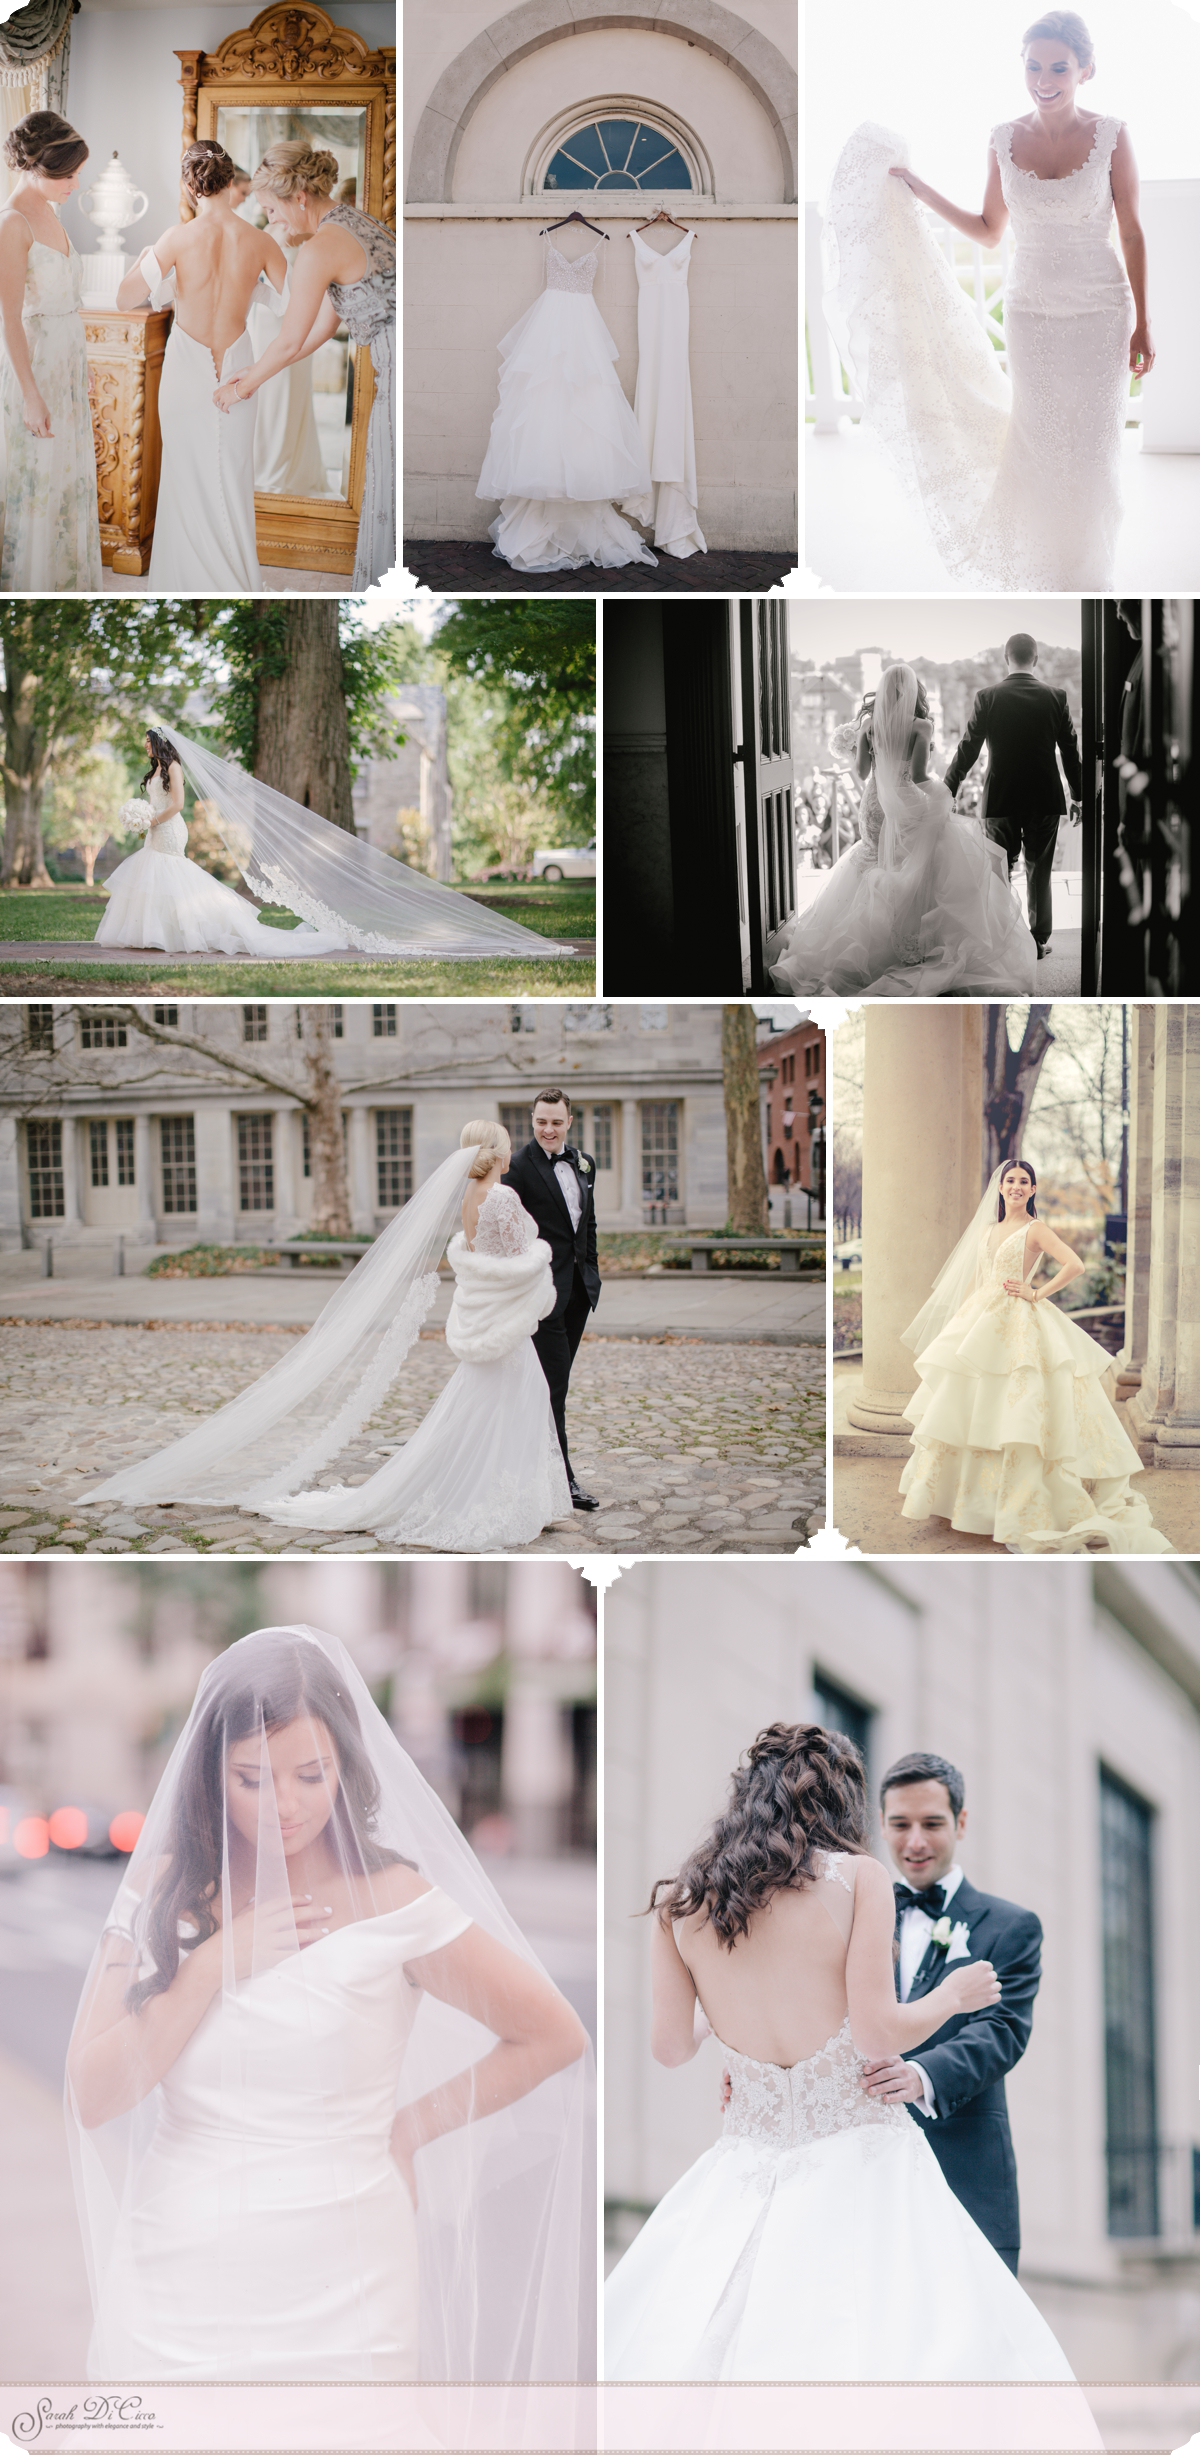 Dresses and Veils Sarah DiCicco Photography - Year in Review 2018